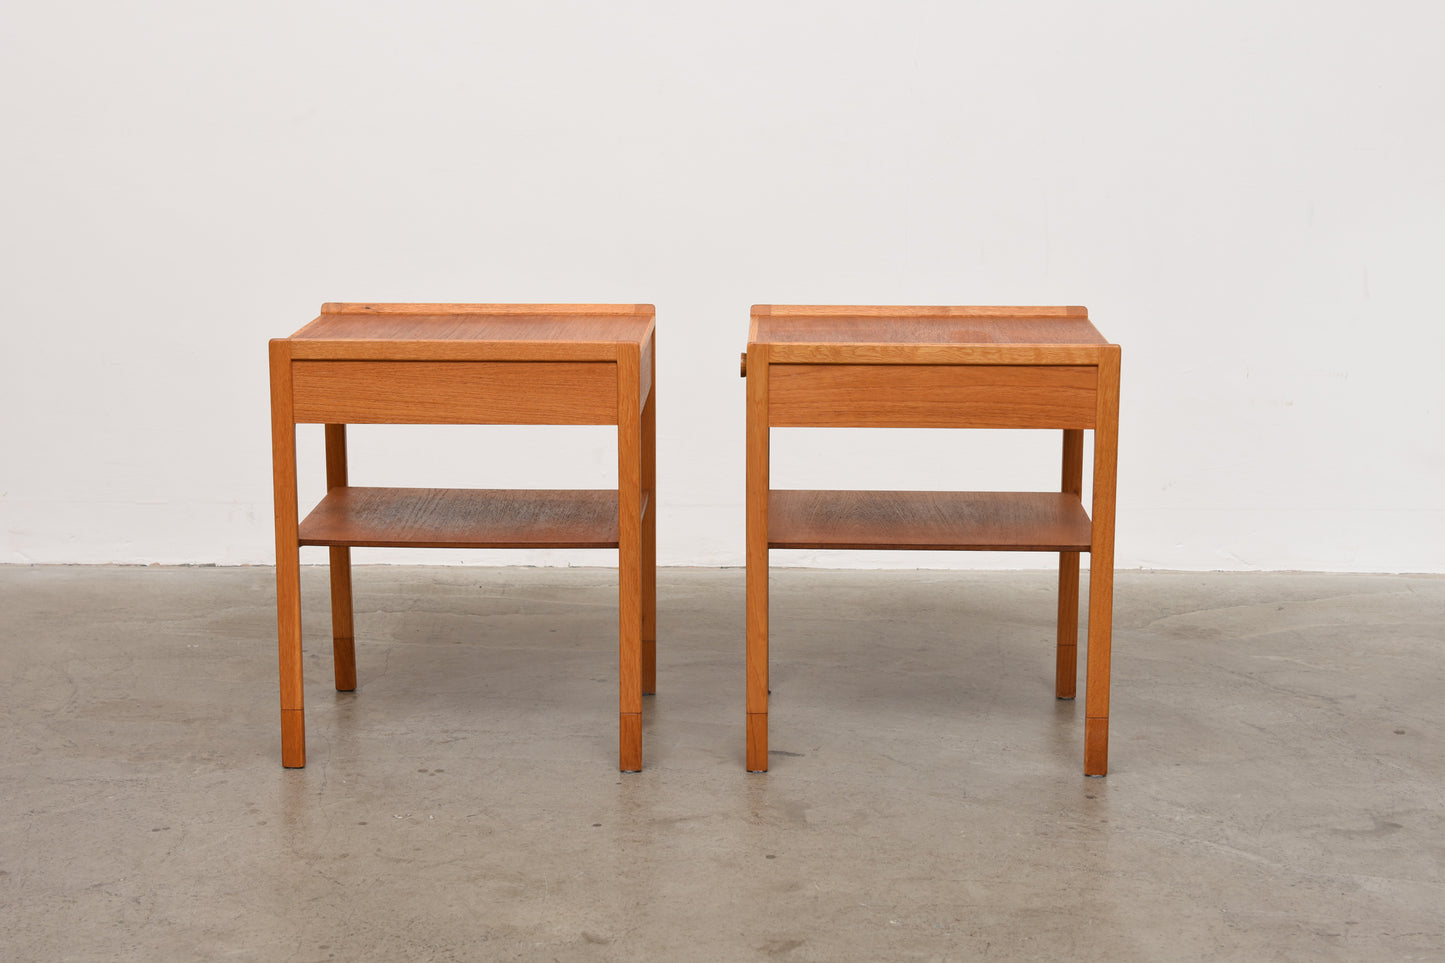 Pair of Swedish bedside tables